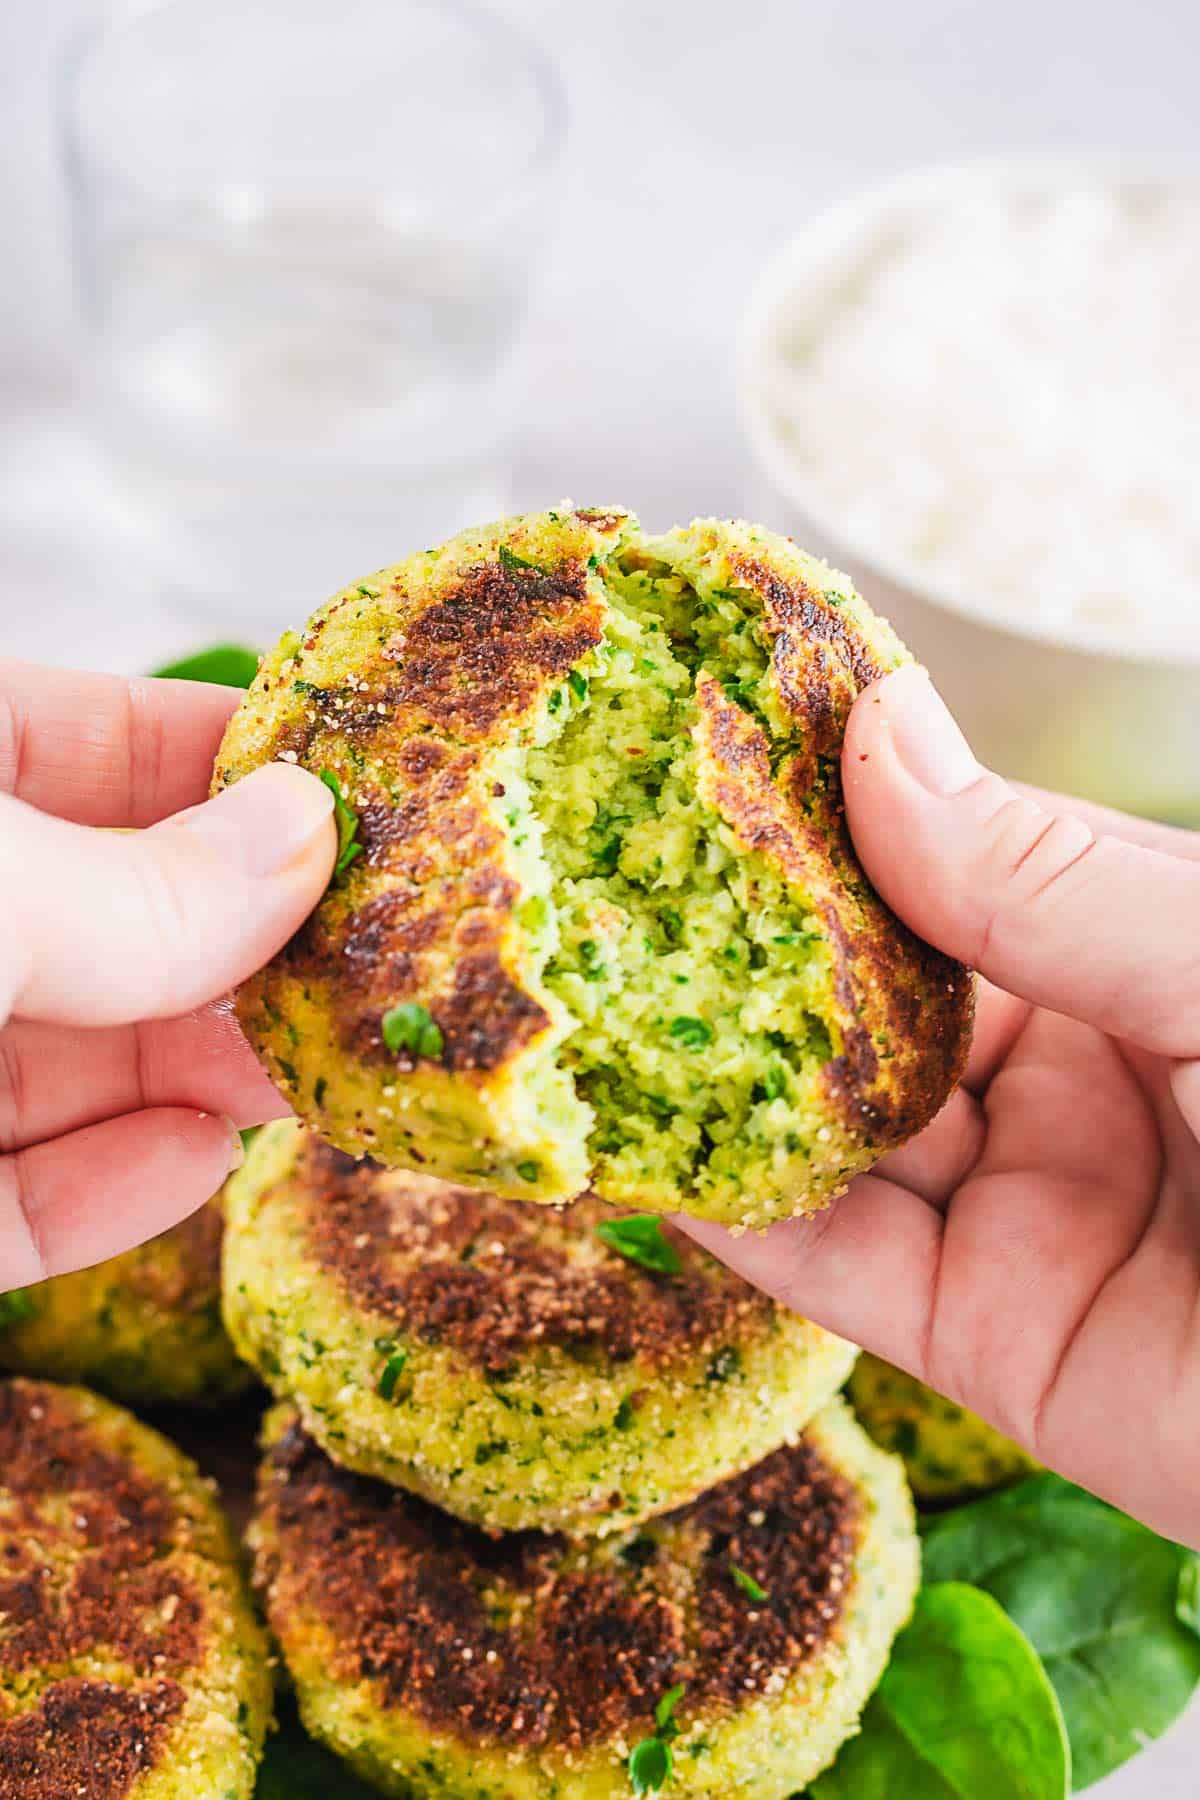 Broccoli spinach and cauliflower fritters/patties